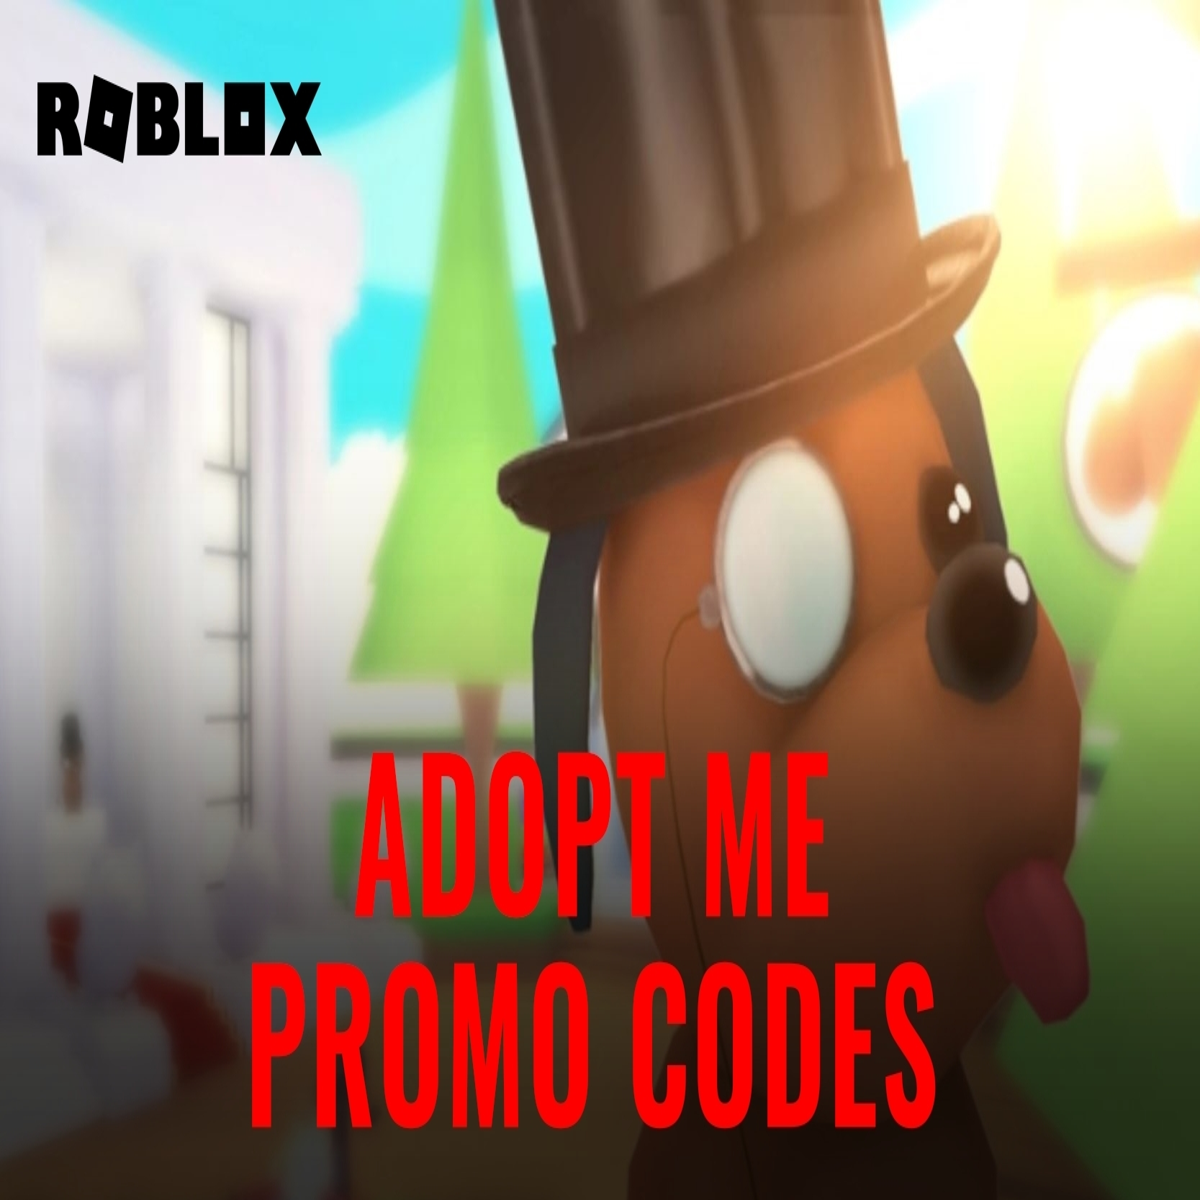 How To Play Roblox On Playstation! Adopt Me PS5 